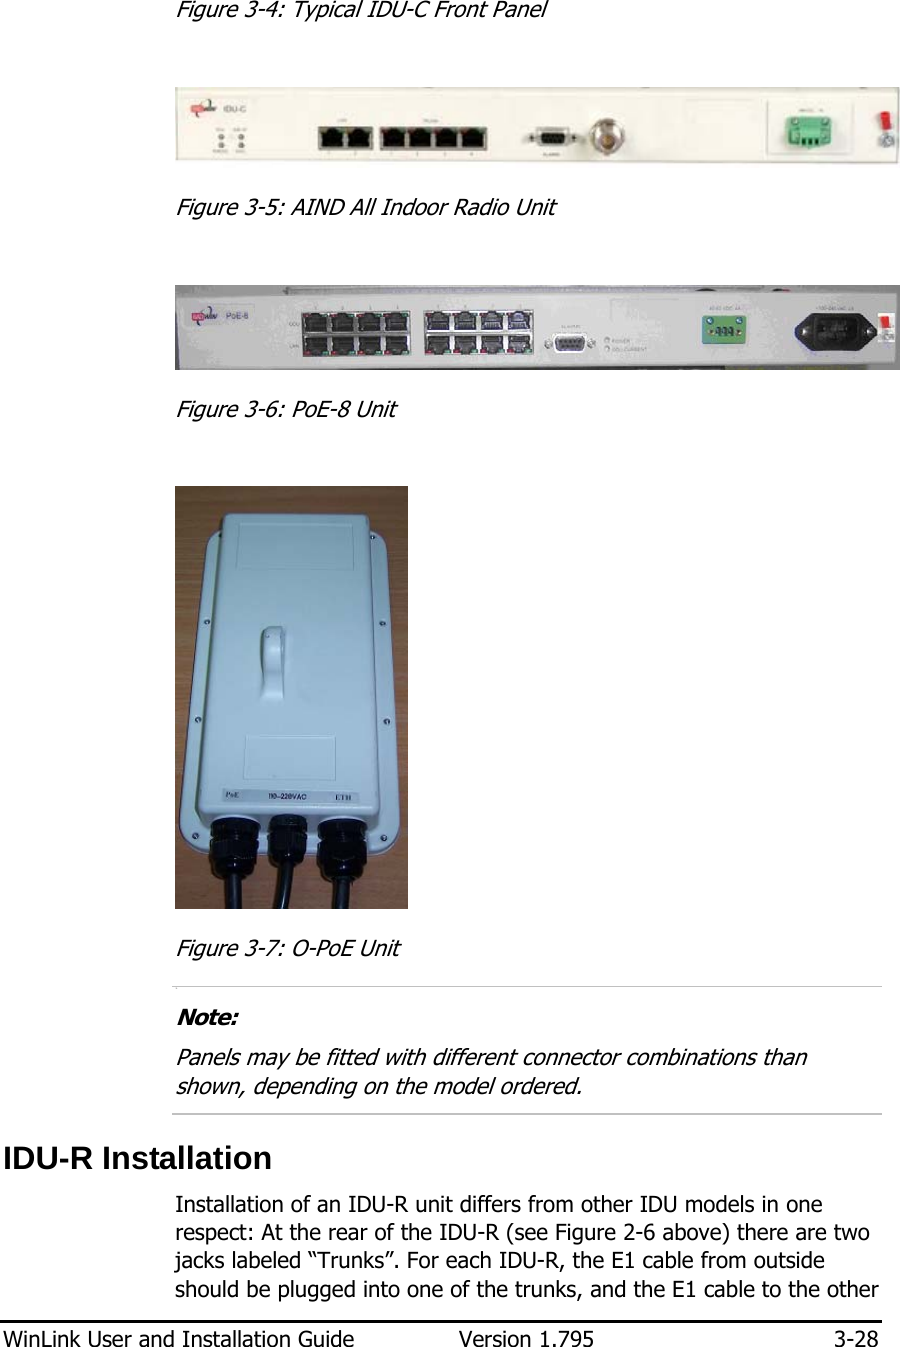  WinLink User and Installation Guide  Version 1.795  3-28  Figure  3-4: Typical IDU-C Front Panel   Figure  3-5: AIND All Indoor Radio Unit    Figure  3-6: PoE-8 Unit    Figure  3-7: O-PoE Unit 3.  Note: Panels may be fitted with different connector combinations than shown, depending on the model ordered.  IDU-R Installation Installation of an IDU-R unit differs from other IDU models in one respect: At the rear of the IDU-R (see Figure  2-6 above) there are two jacks labeled “Trunks”. For each IDU-R, the E1 cable from outside should be plugged into one of the trunks, and the E1 cable to the other 